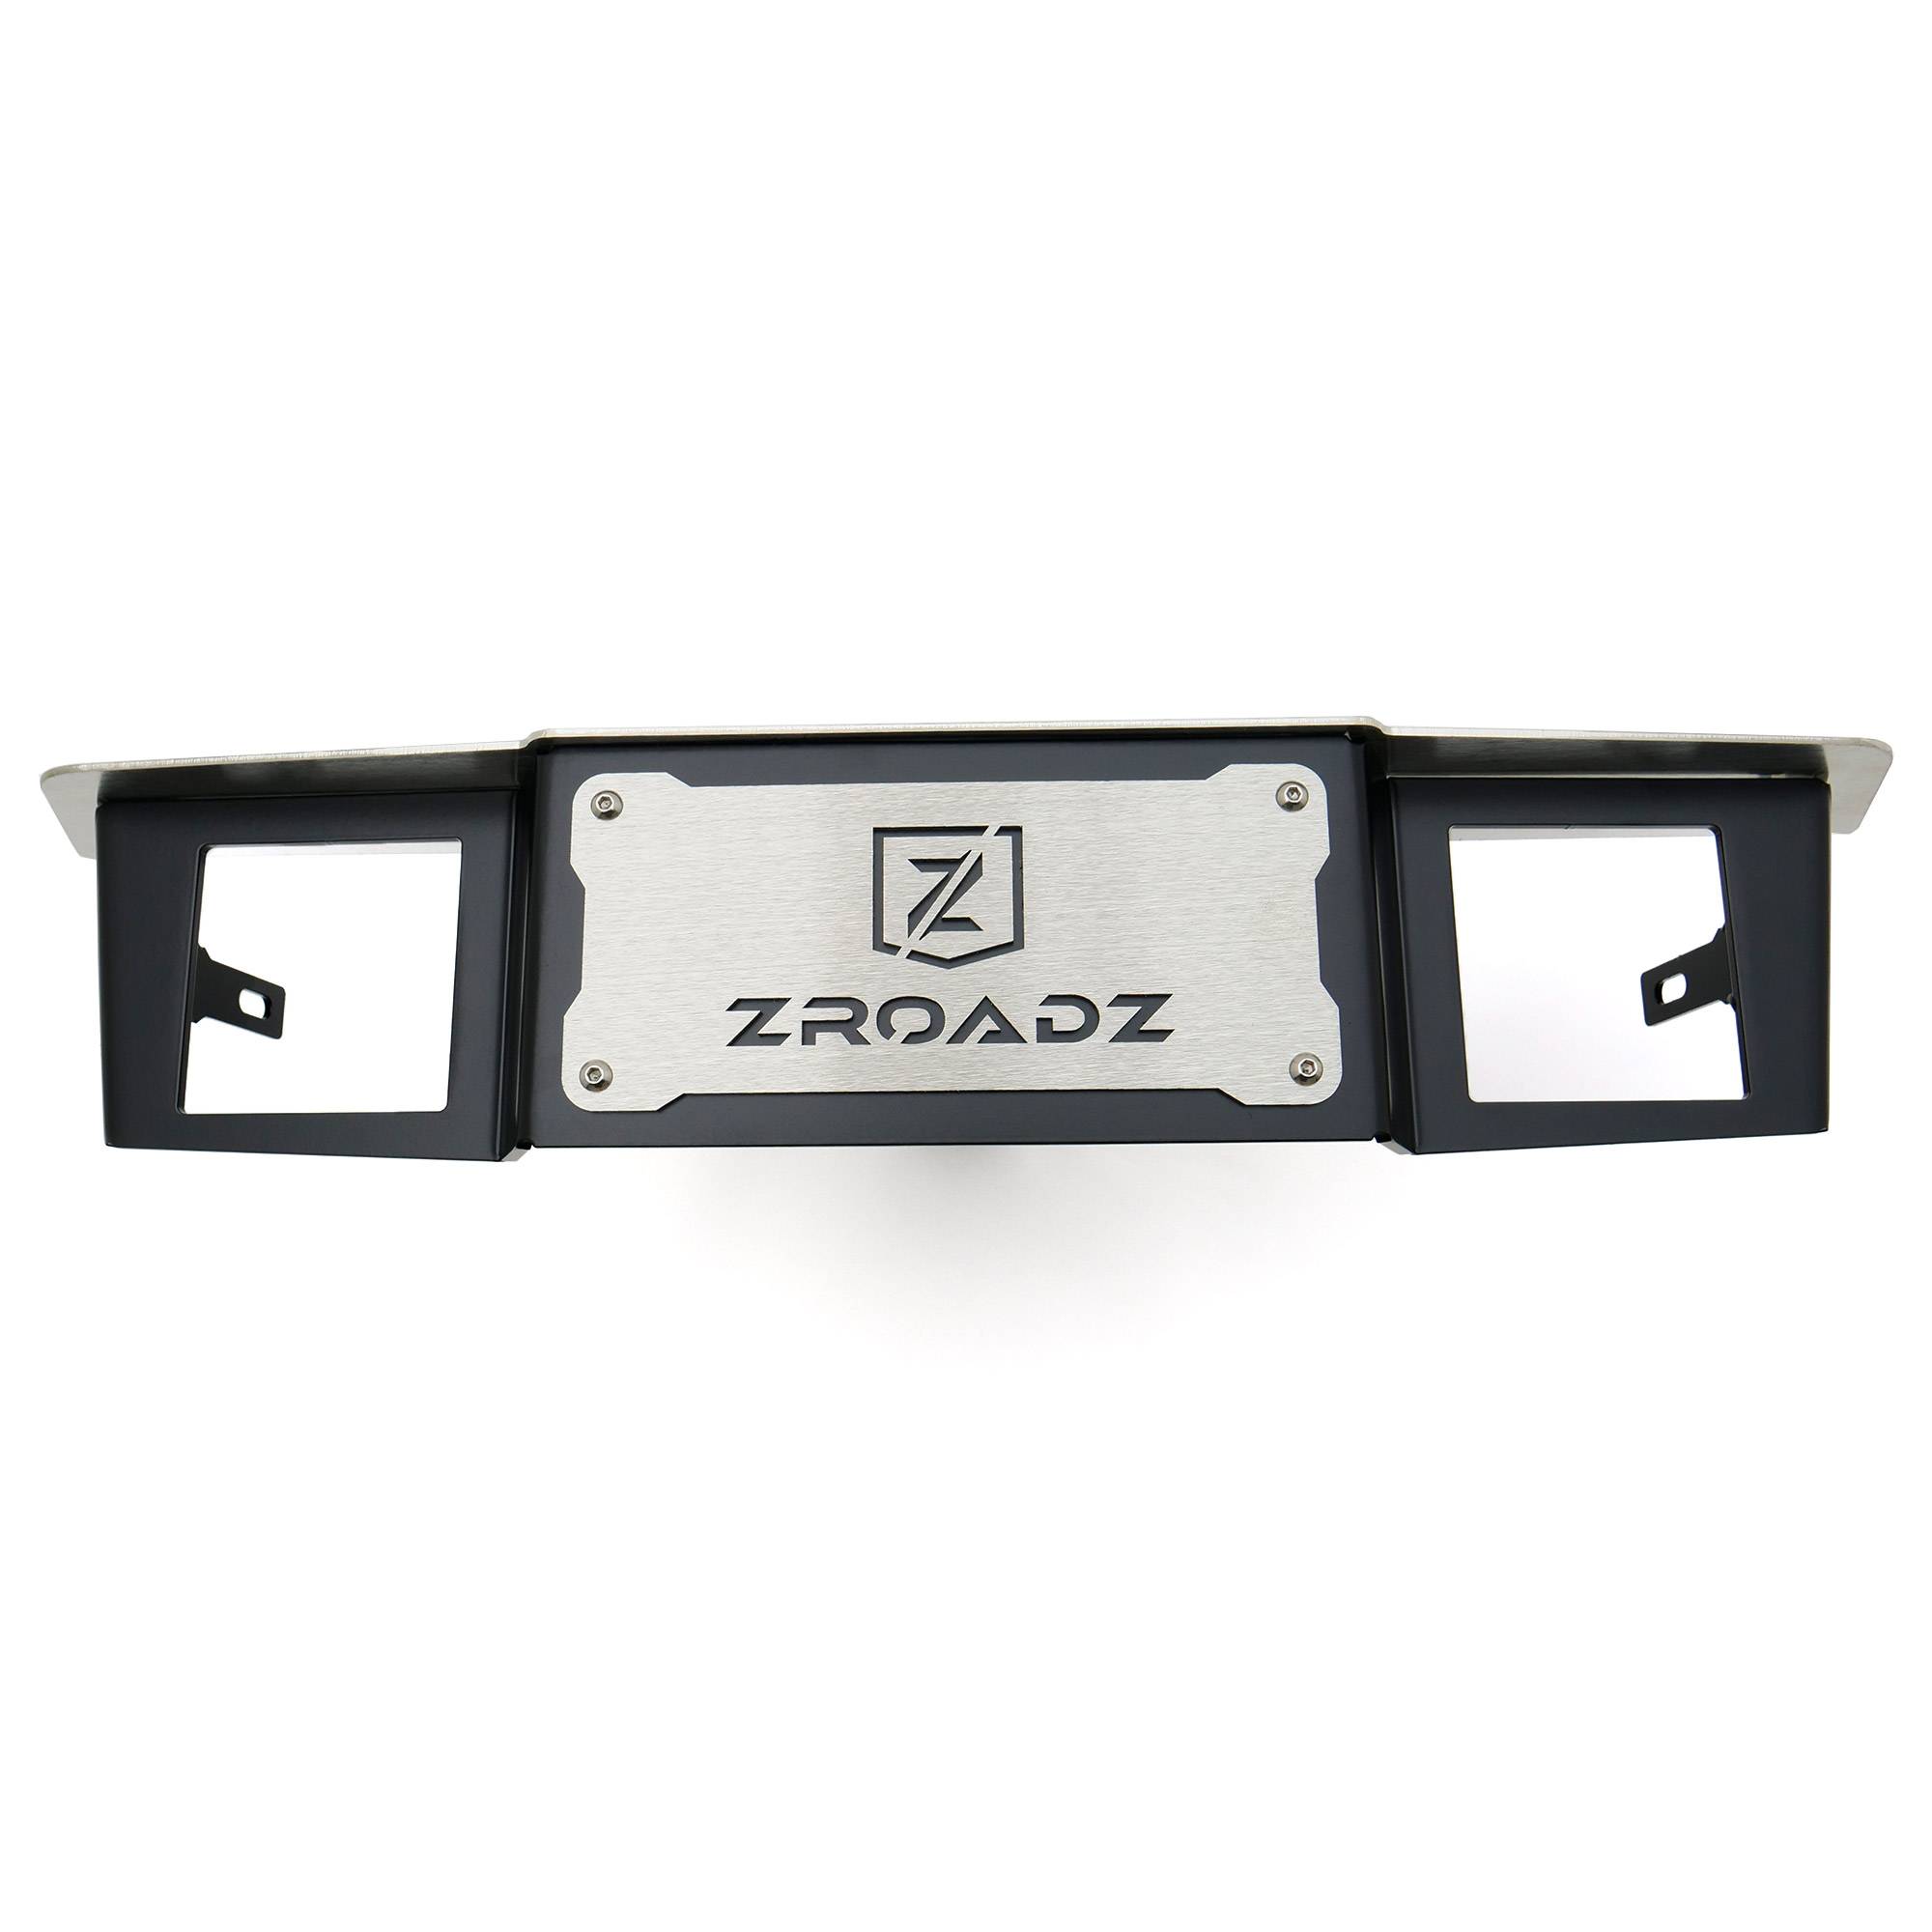 ZROADZ OFF ROAD PRODUCTS - Universal Hitch Step LED Bracket 2 Inch Hitch Receiver, to mount (2) 3 Inch LED Pod Lights - Part # Z390010